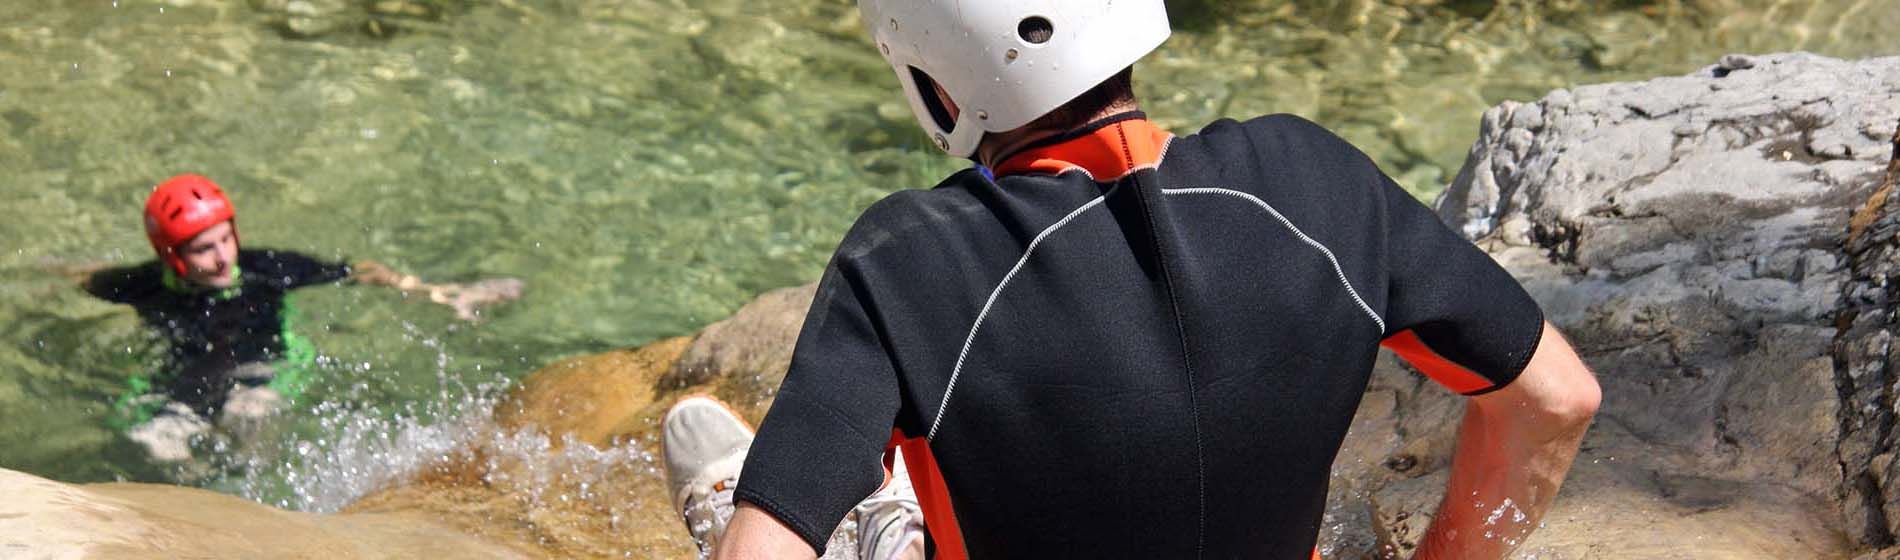 Canyoning martinique